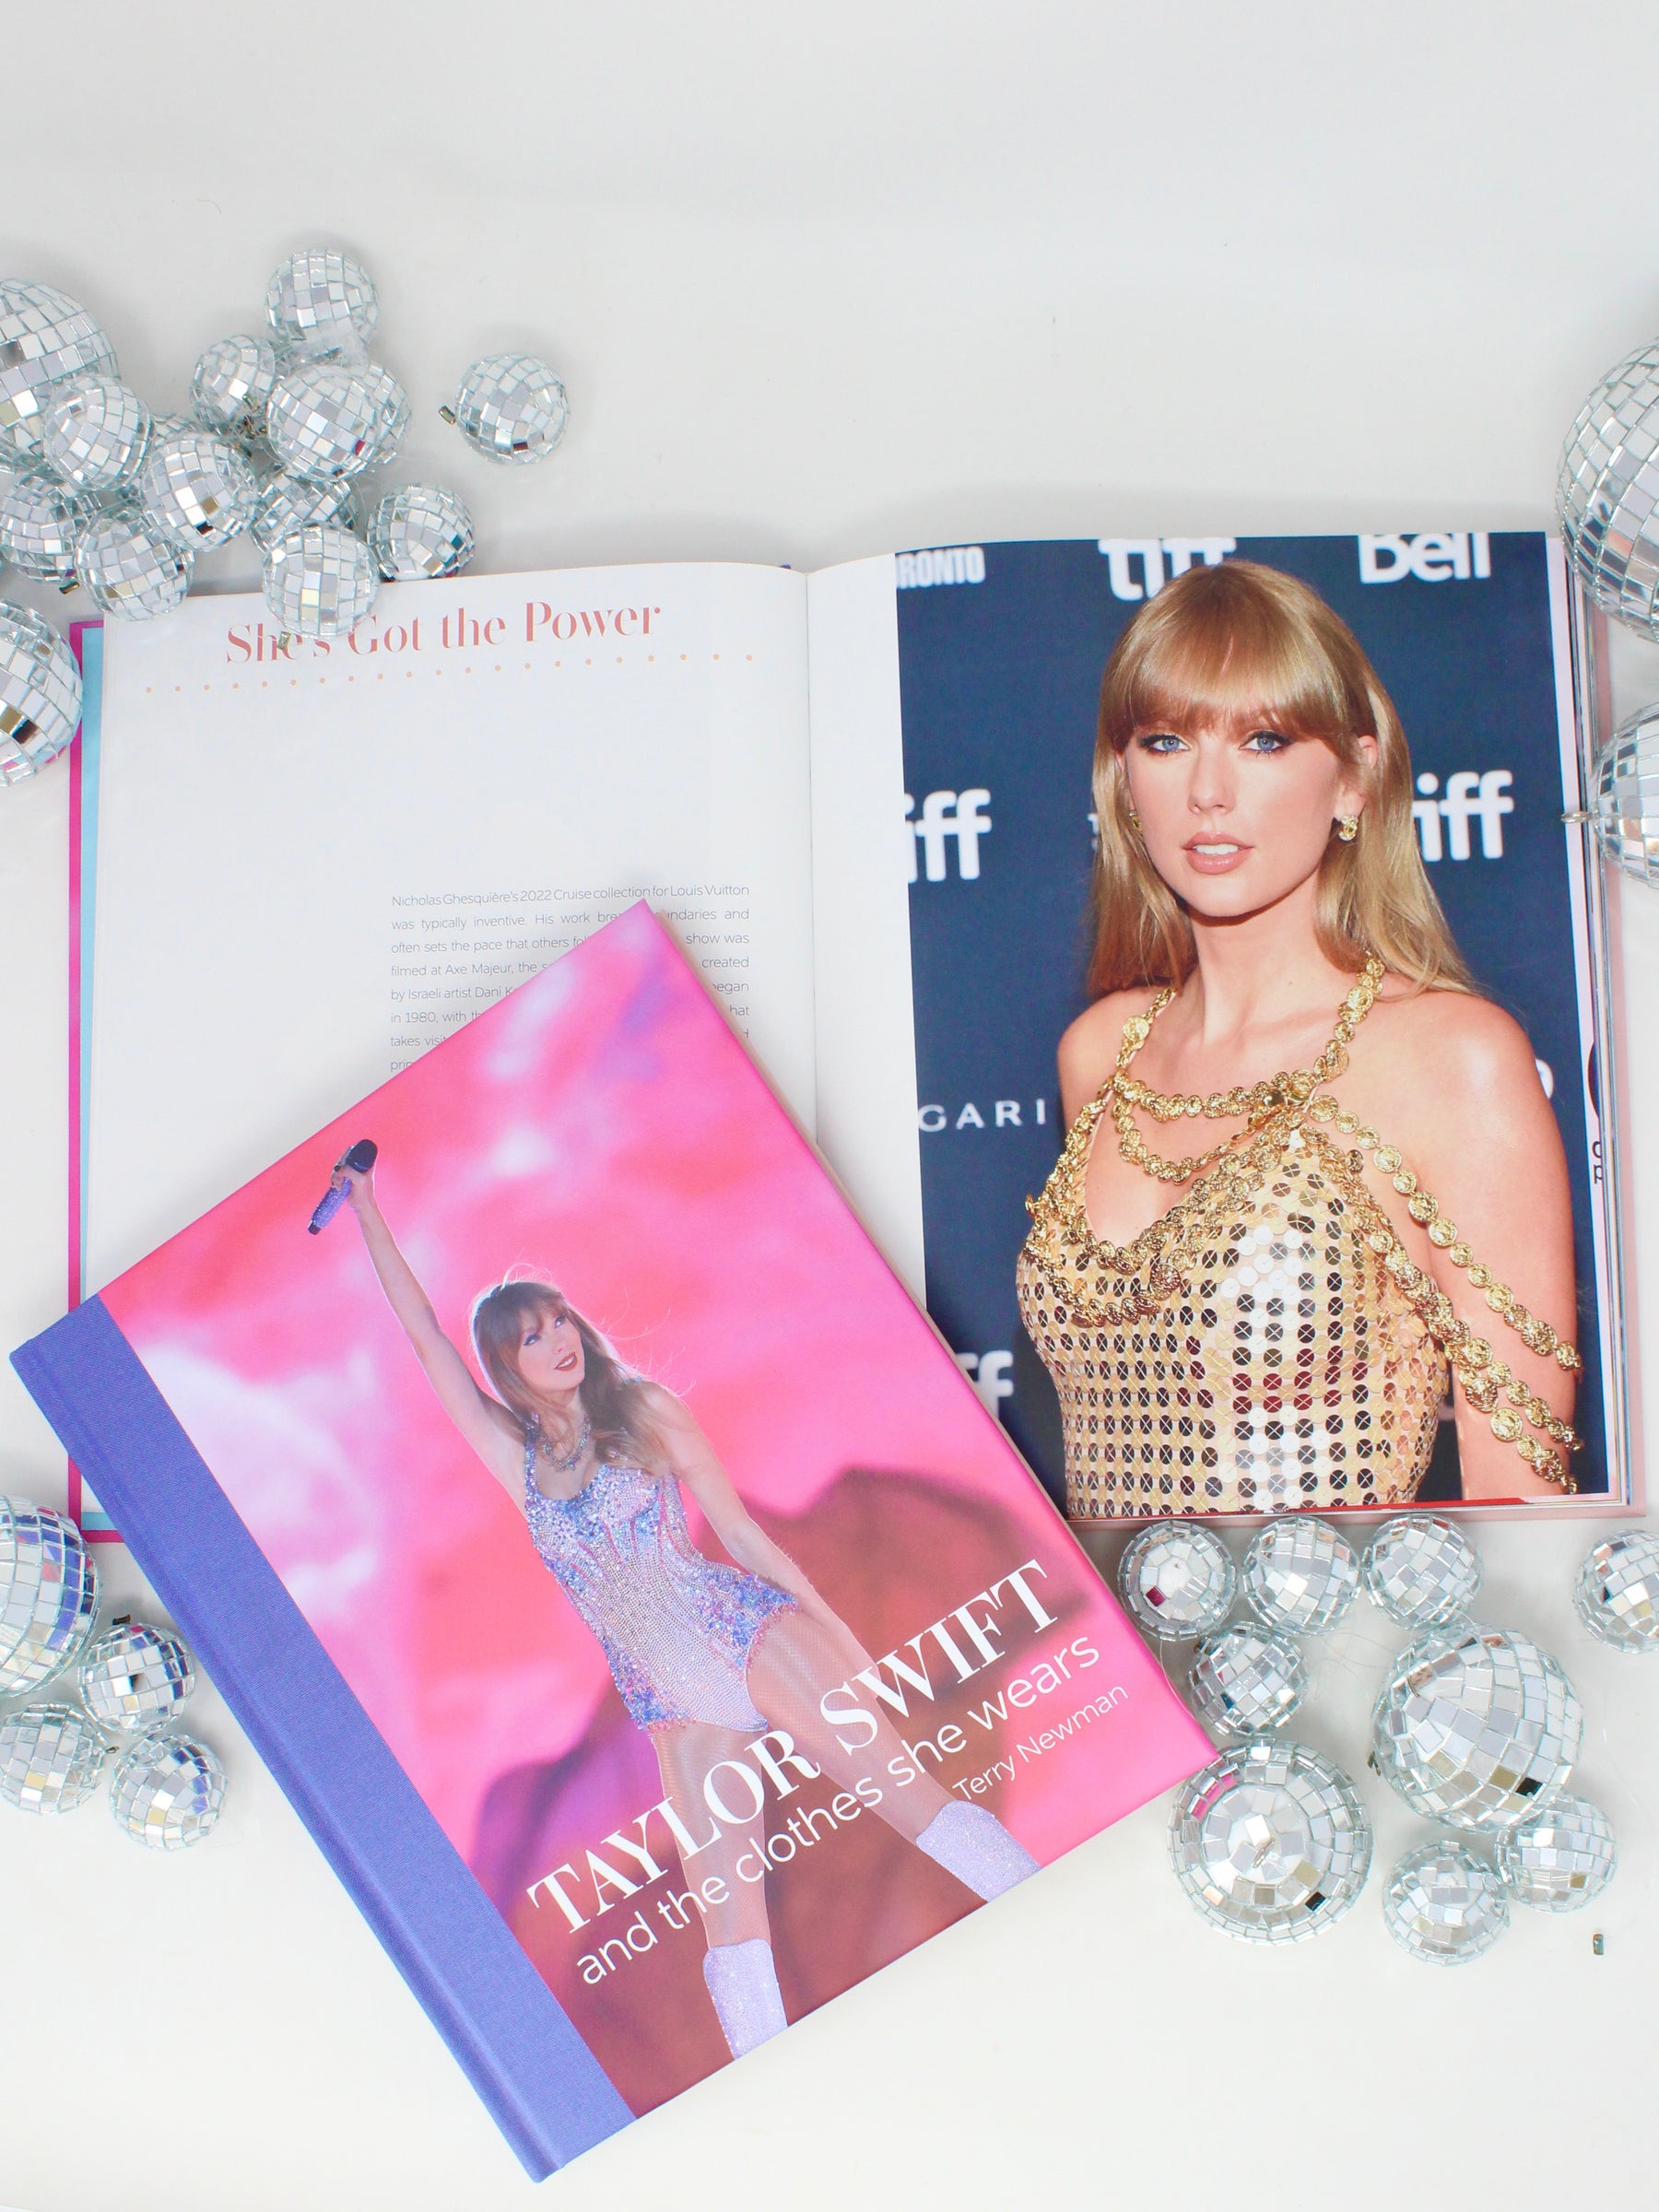 Taylor Swift & The Clothes She Wears Book – Vintage Charm